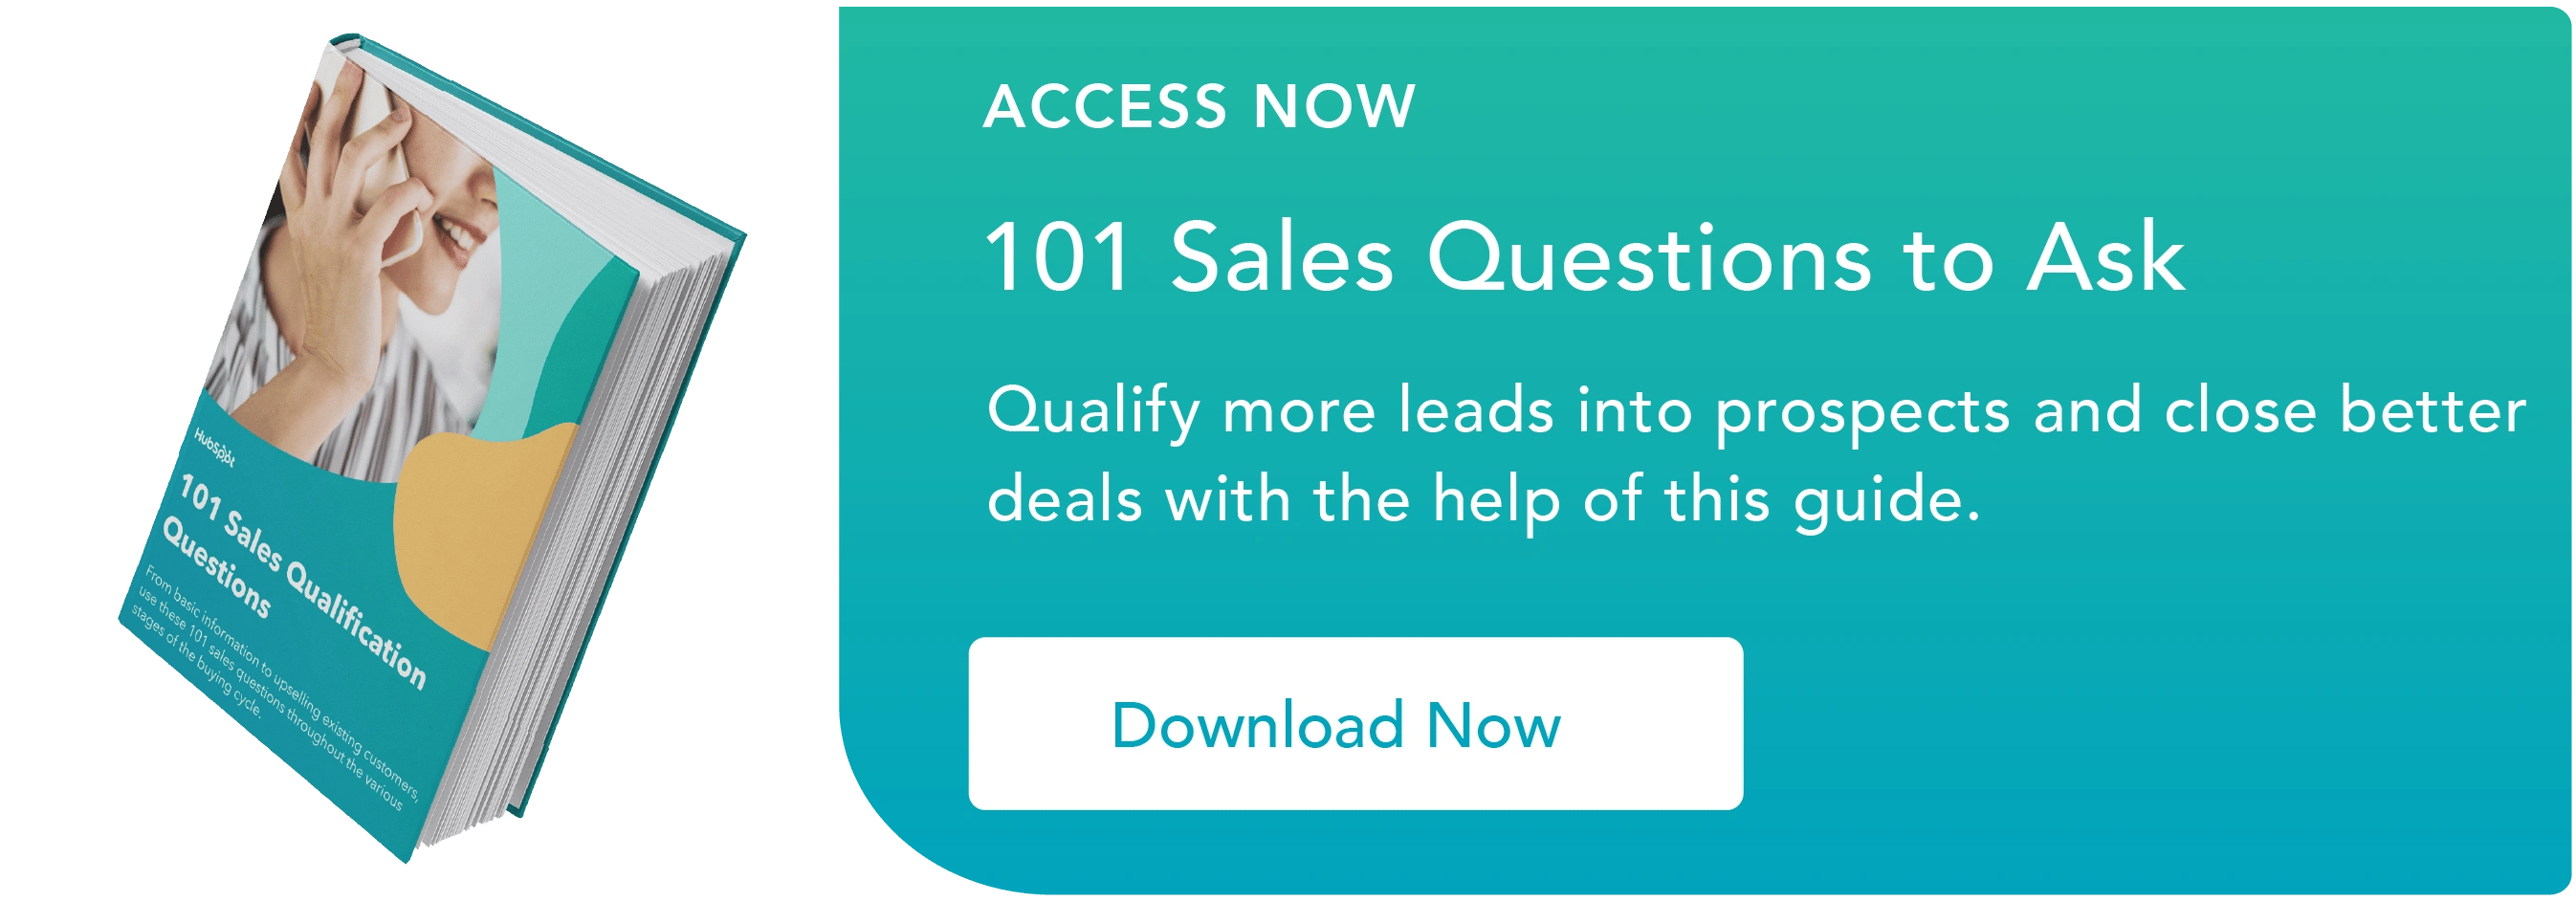 23-questions-customers-needs-si_1